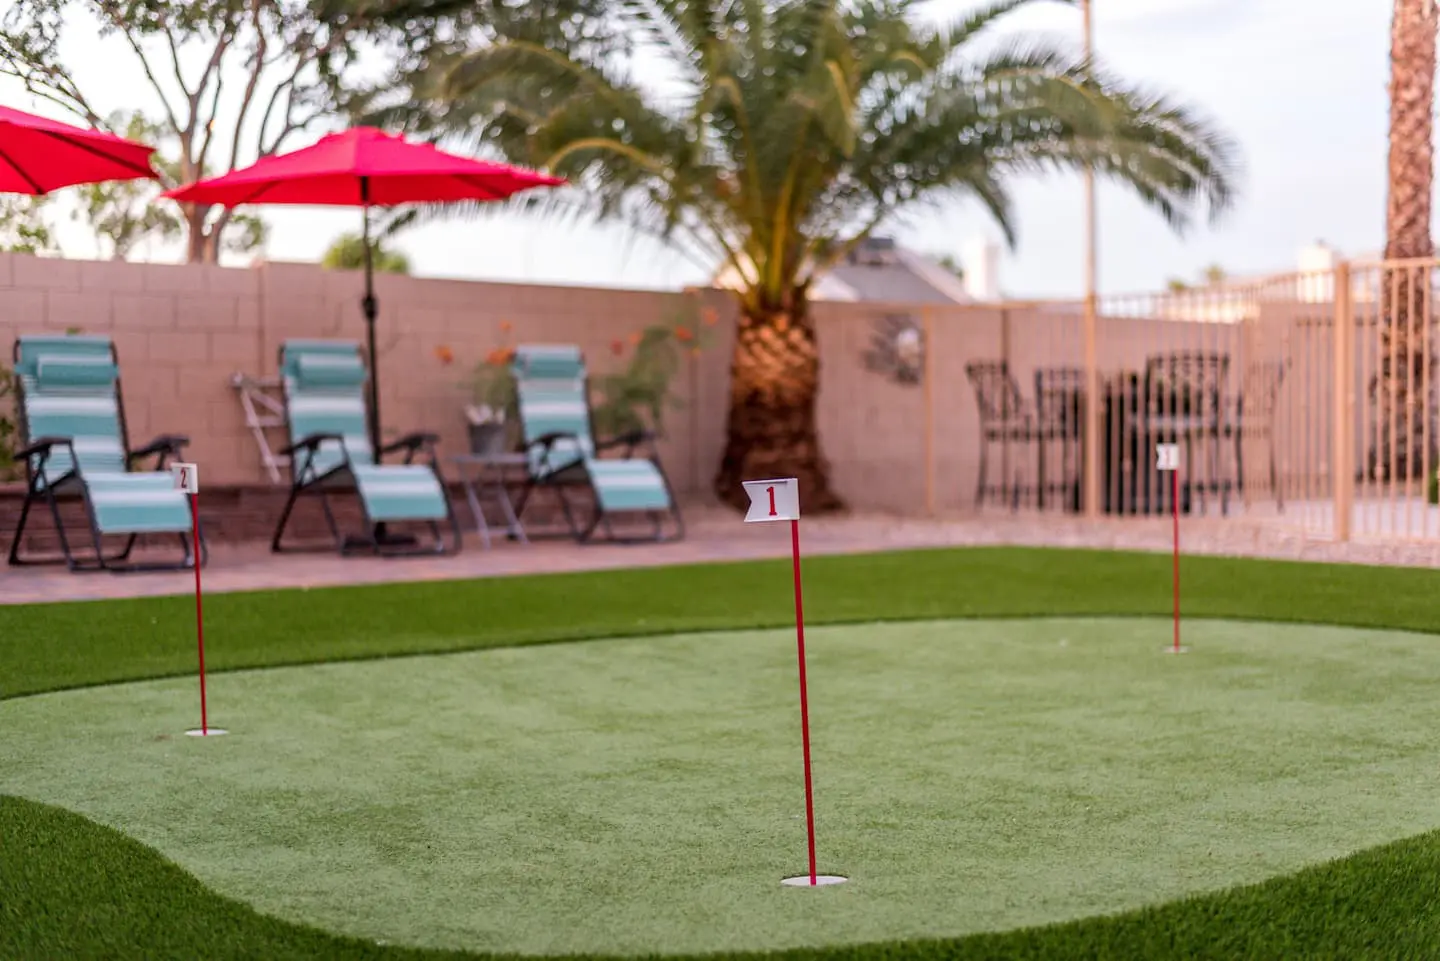 A small putting green with three red flag markers is in a backyard setting featuring pet-friendly turf. Lounge chairs sit under red umbrellas, and palm trees are visible in the background. A fence encloses the area, and a table with chairs is seen in the corner.